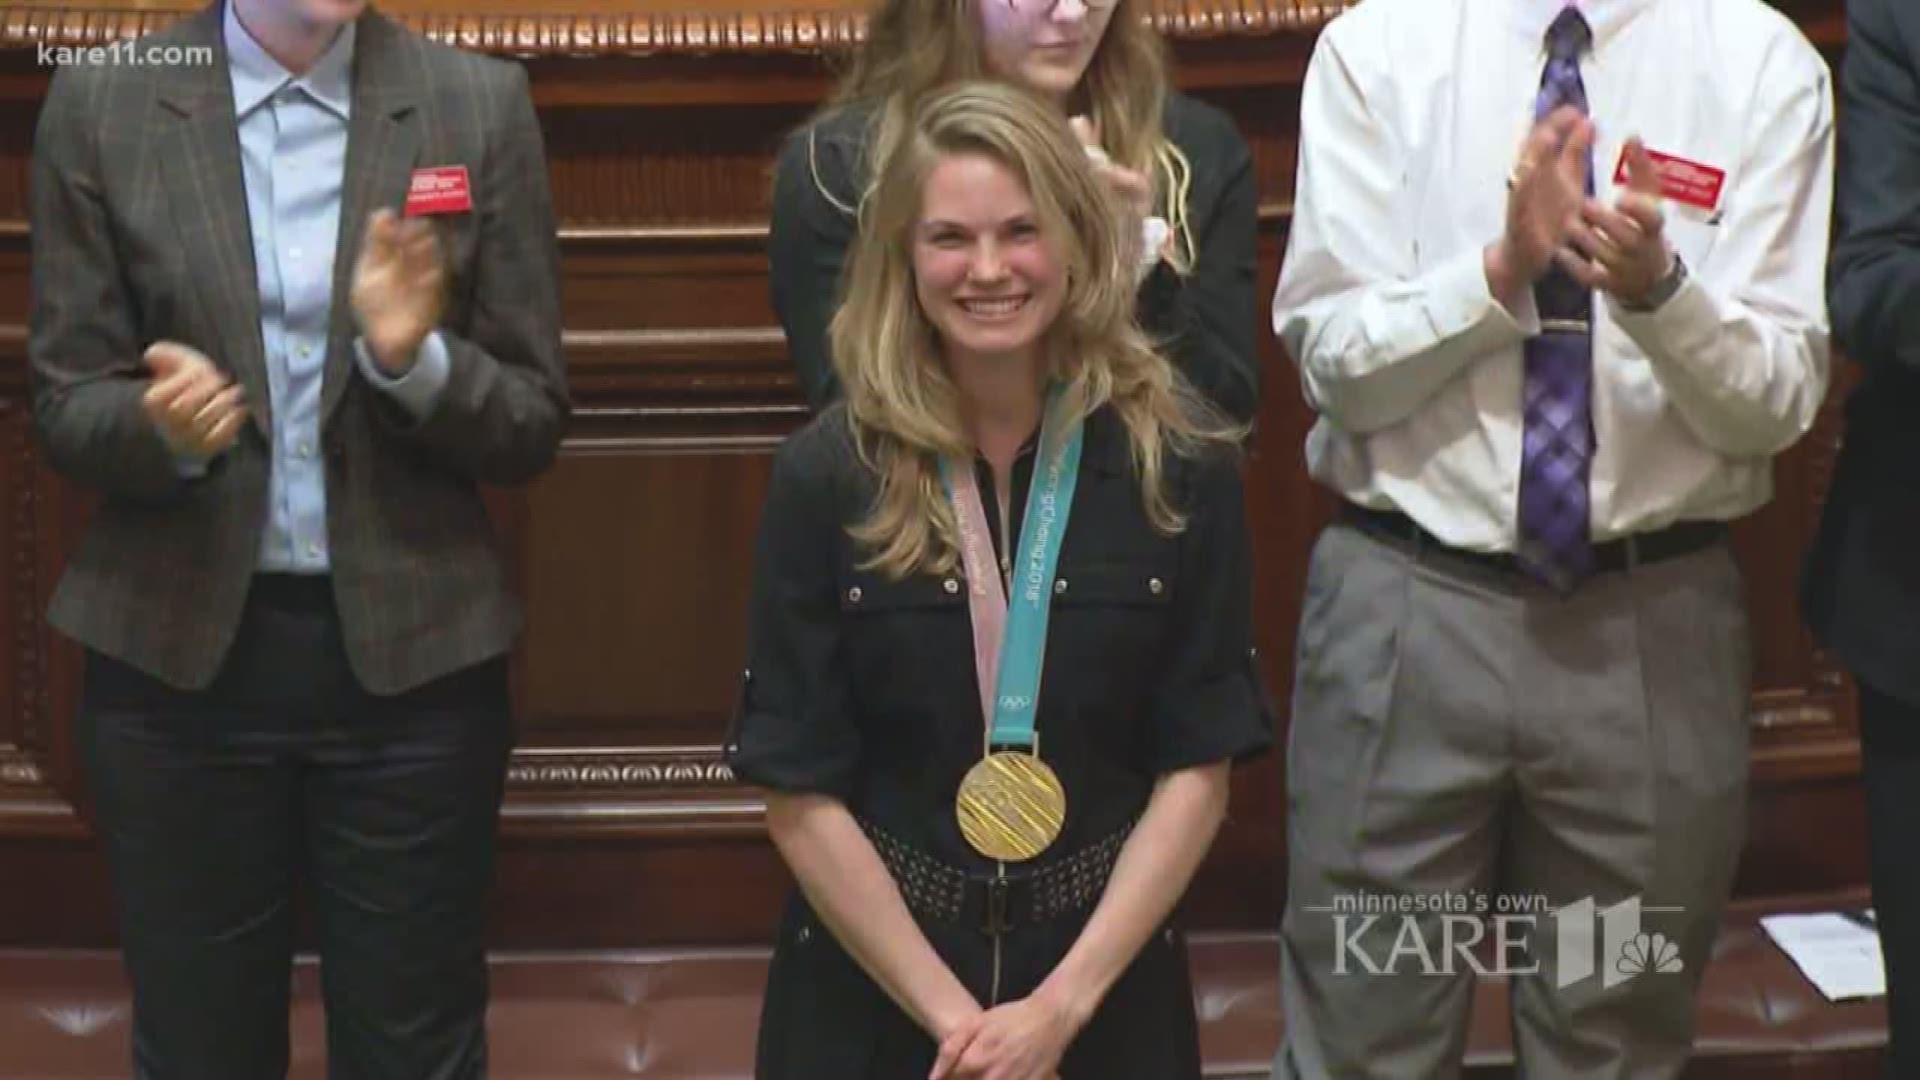 The gold medalist got a warm welcome home at the state capitol where she started her push to bring a big race to Minnesota.